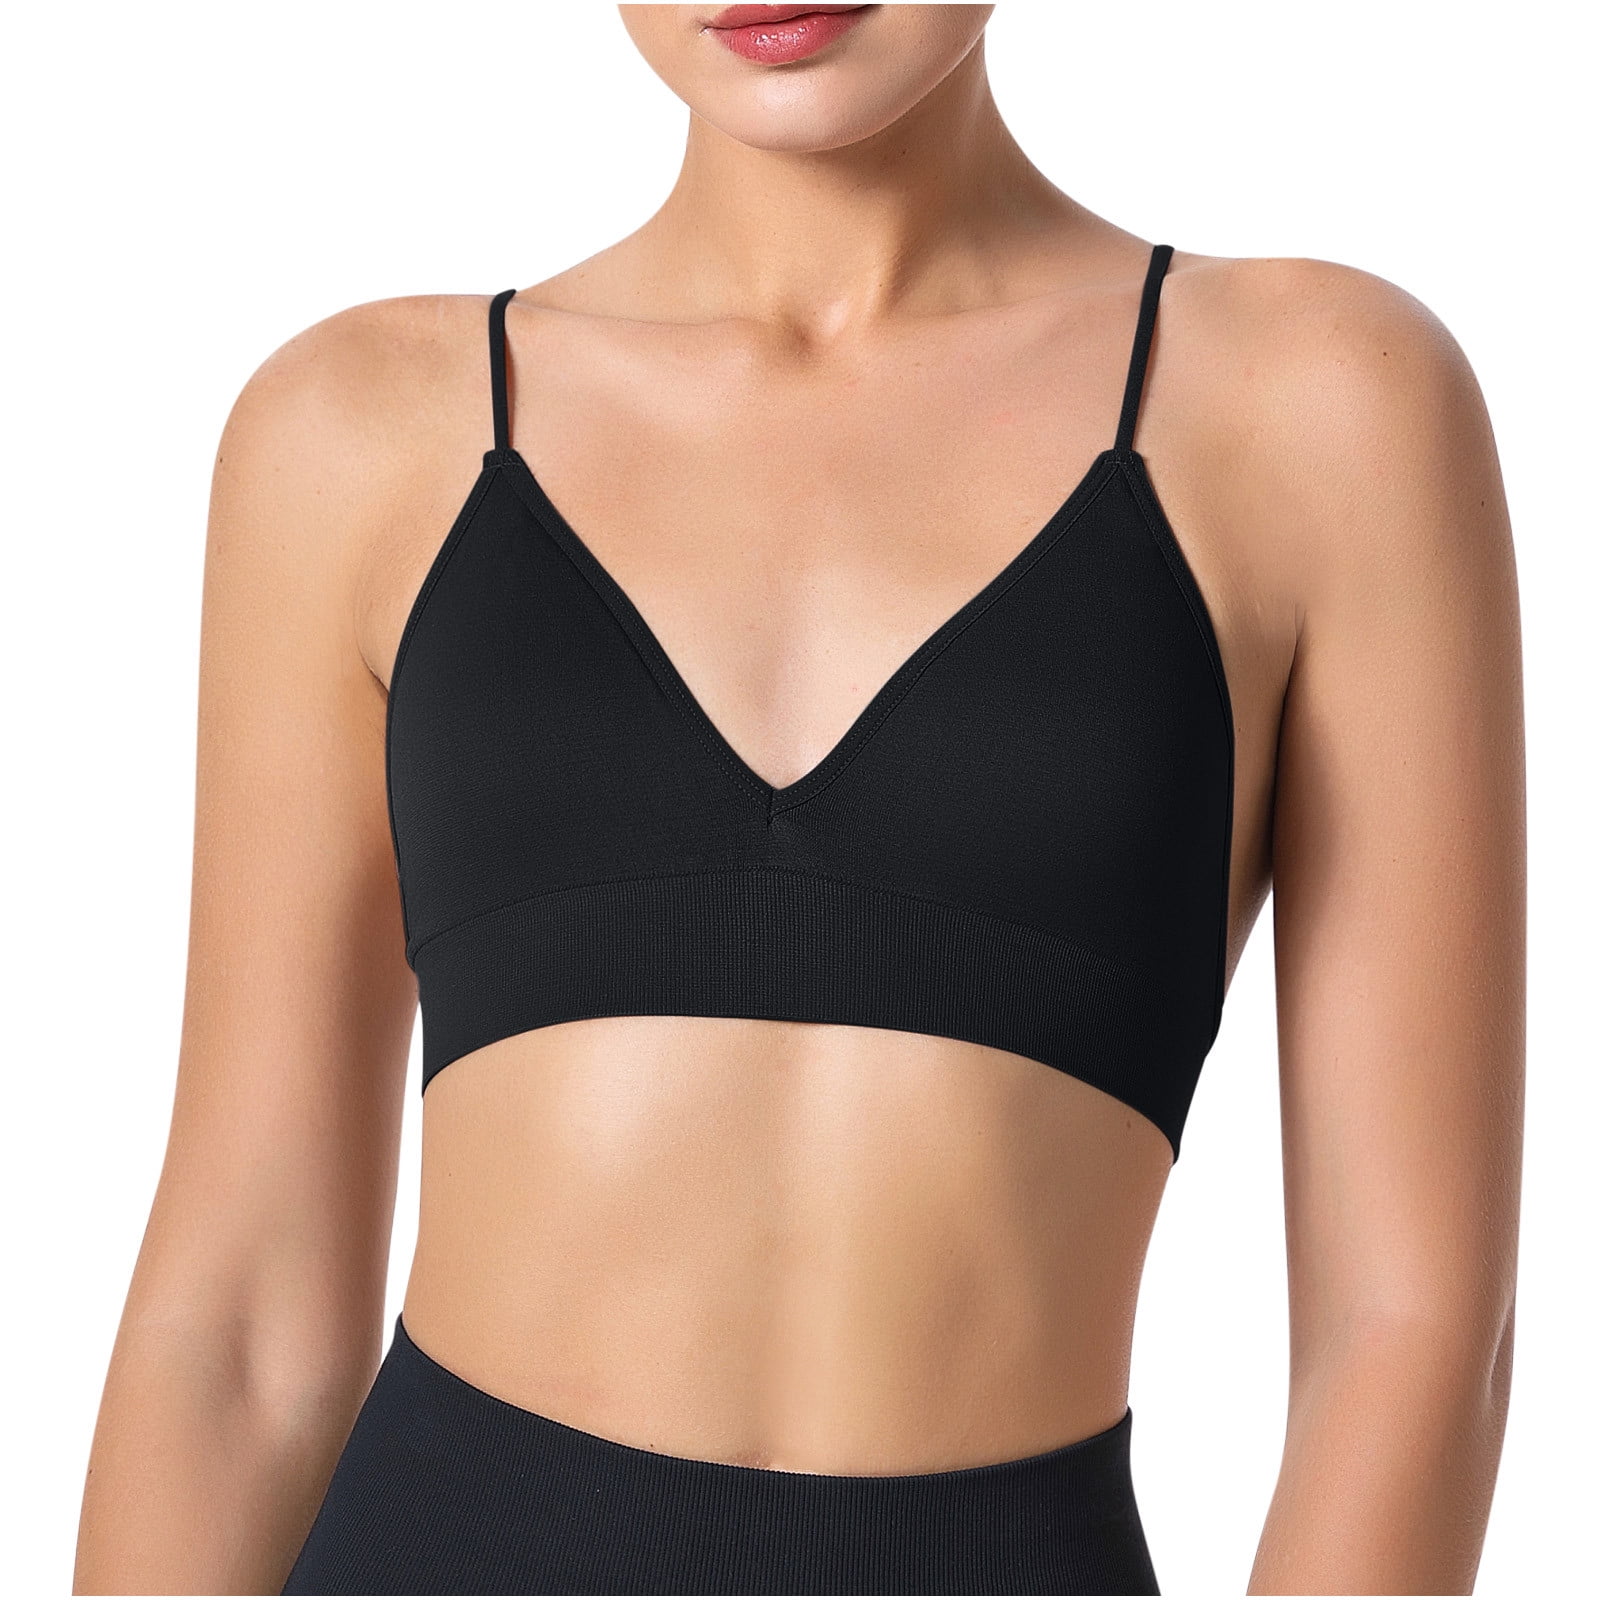 Mrat Clearance Front Clasp Bras for Women Clearance Comfort